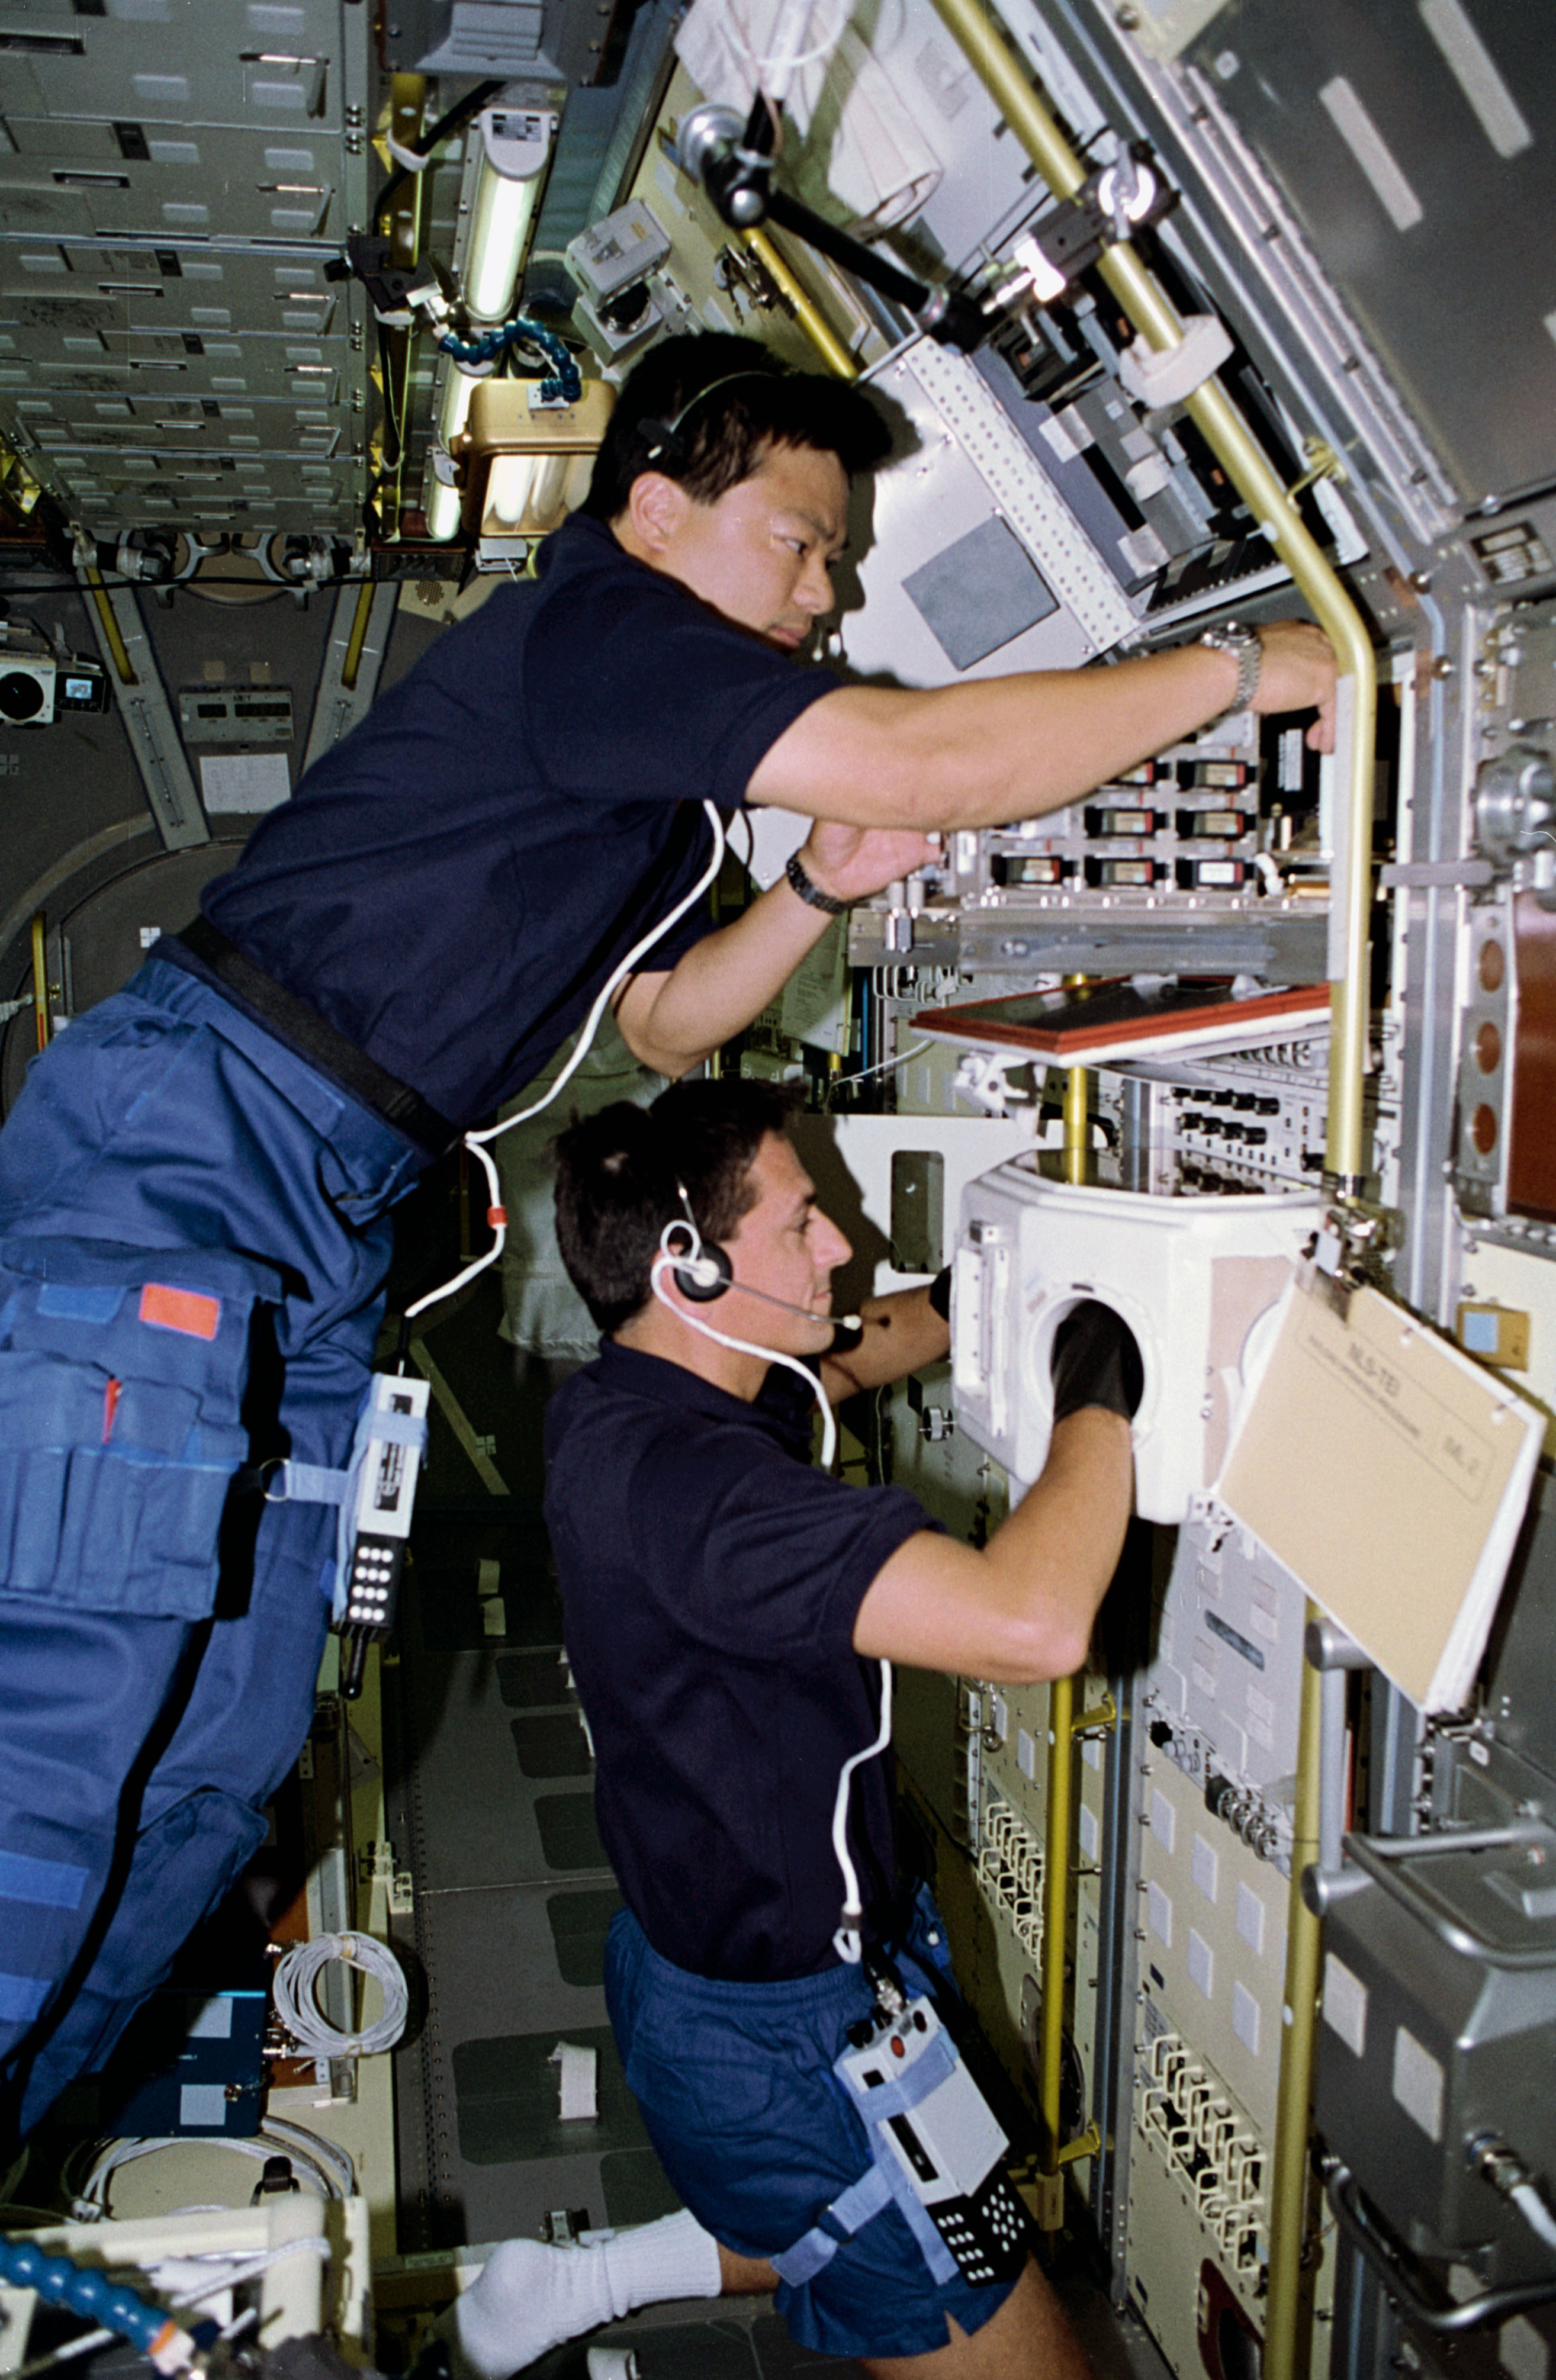 Chiao, left, and Thomas work on the Biorack instruments